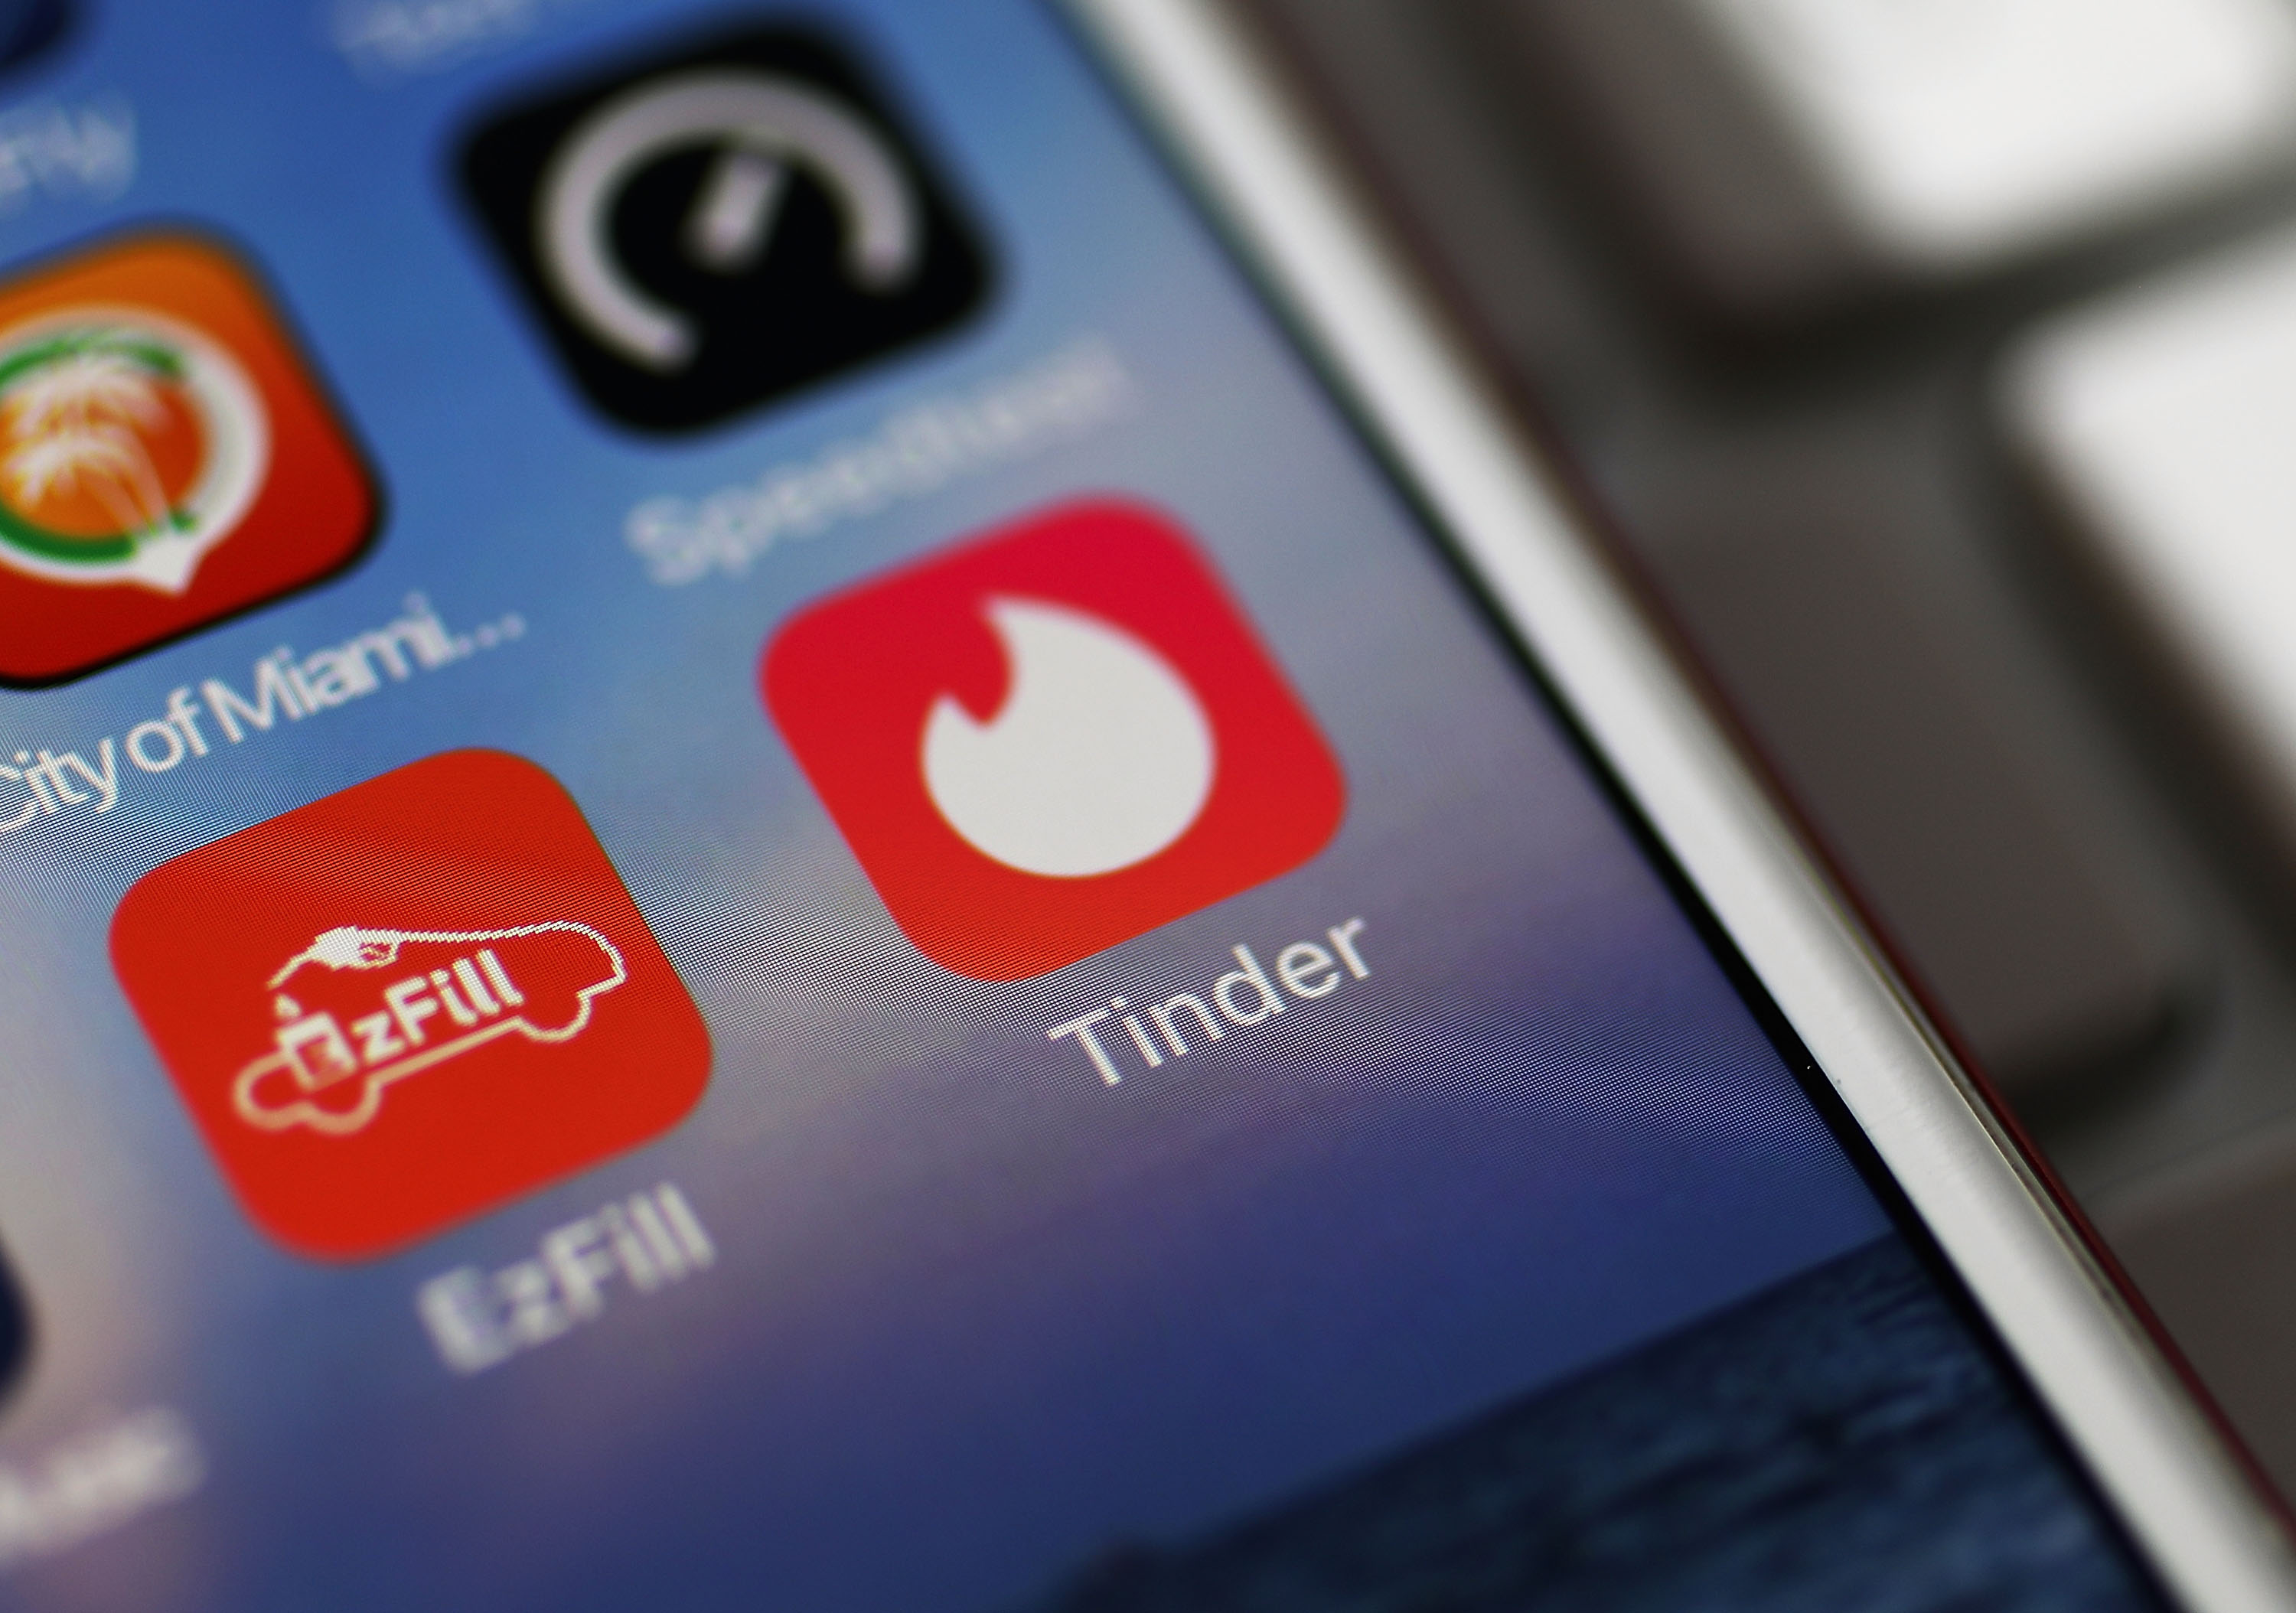 Best Dating Apps Price For Premium Access At Tinder Bumble Money